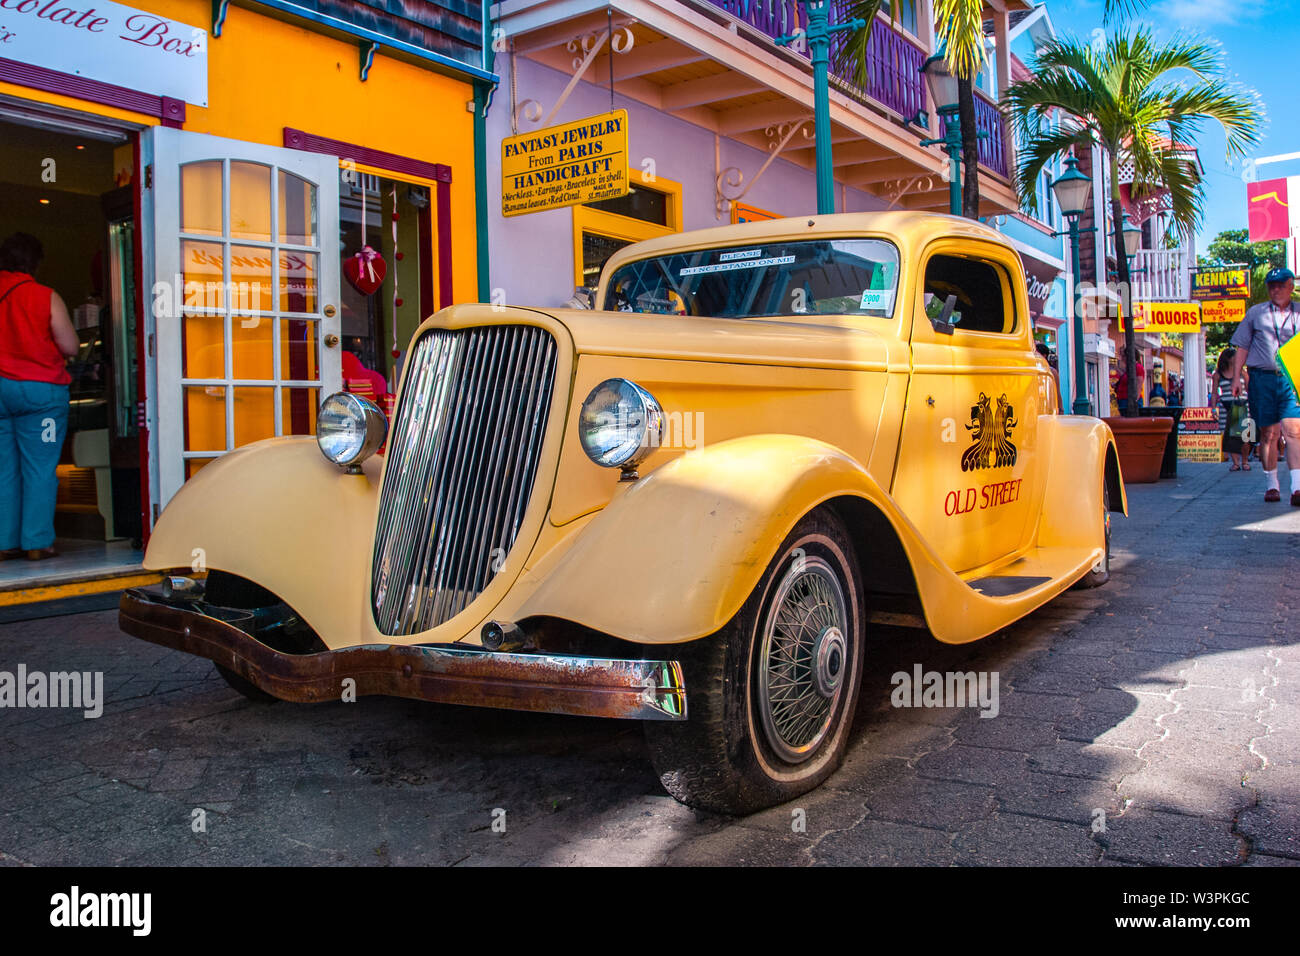 Sint Maarten / Caribbean / Netherlands - January 23.2008: View on the yellow vintage car parked on the street with colorful buildings and palm trees. Stock Photo